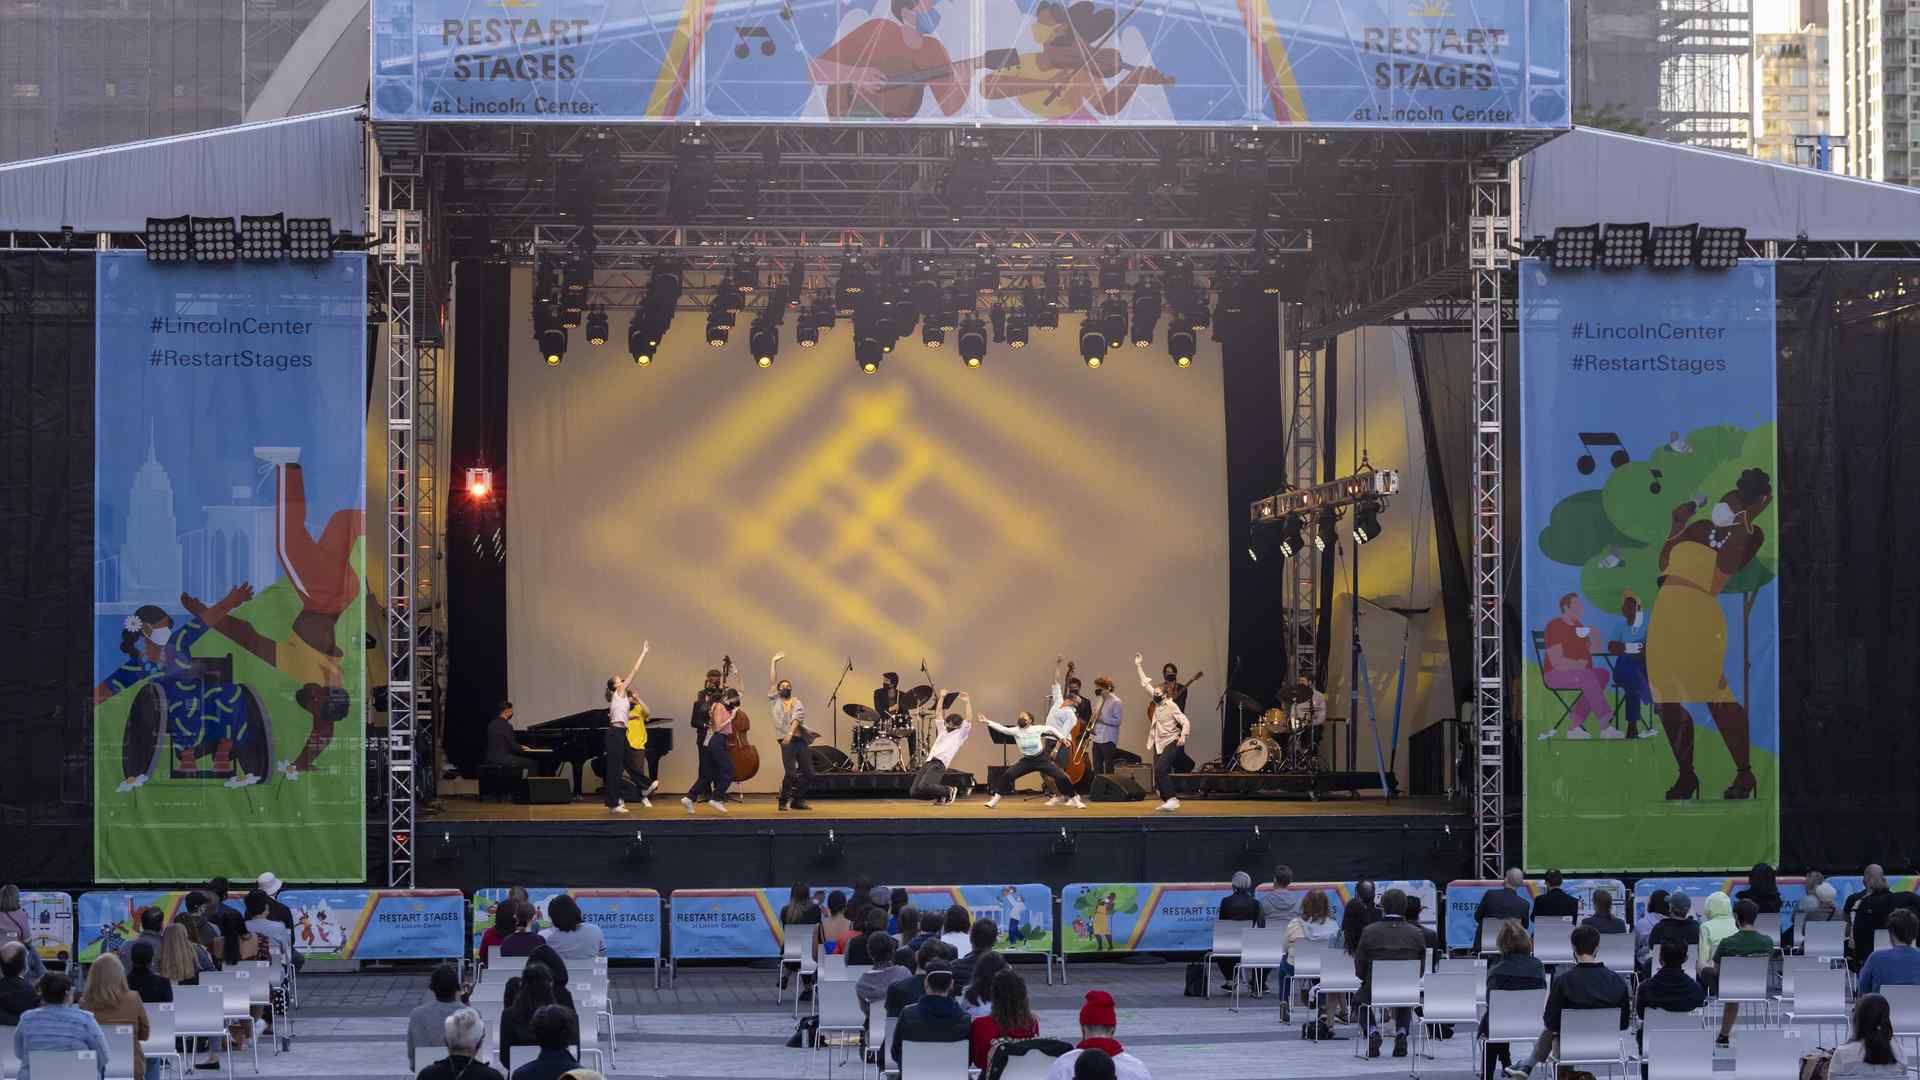 large outdoor stage with performers